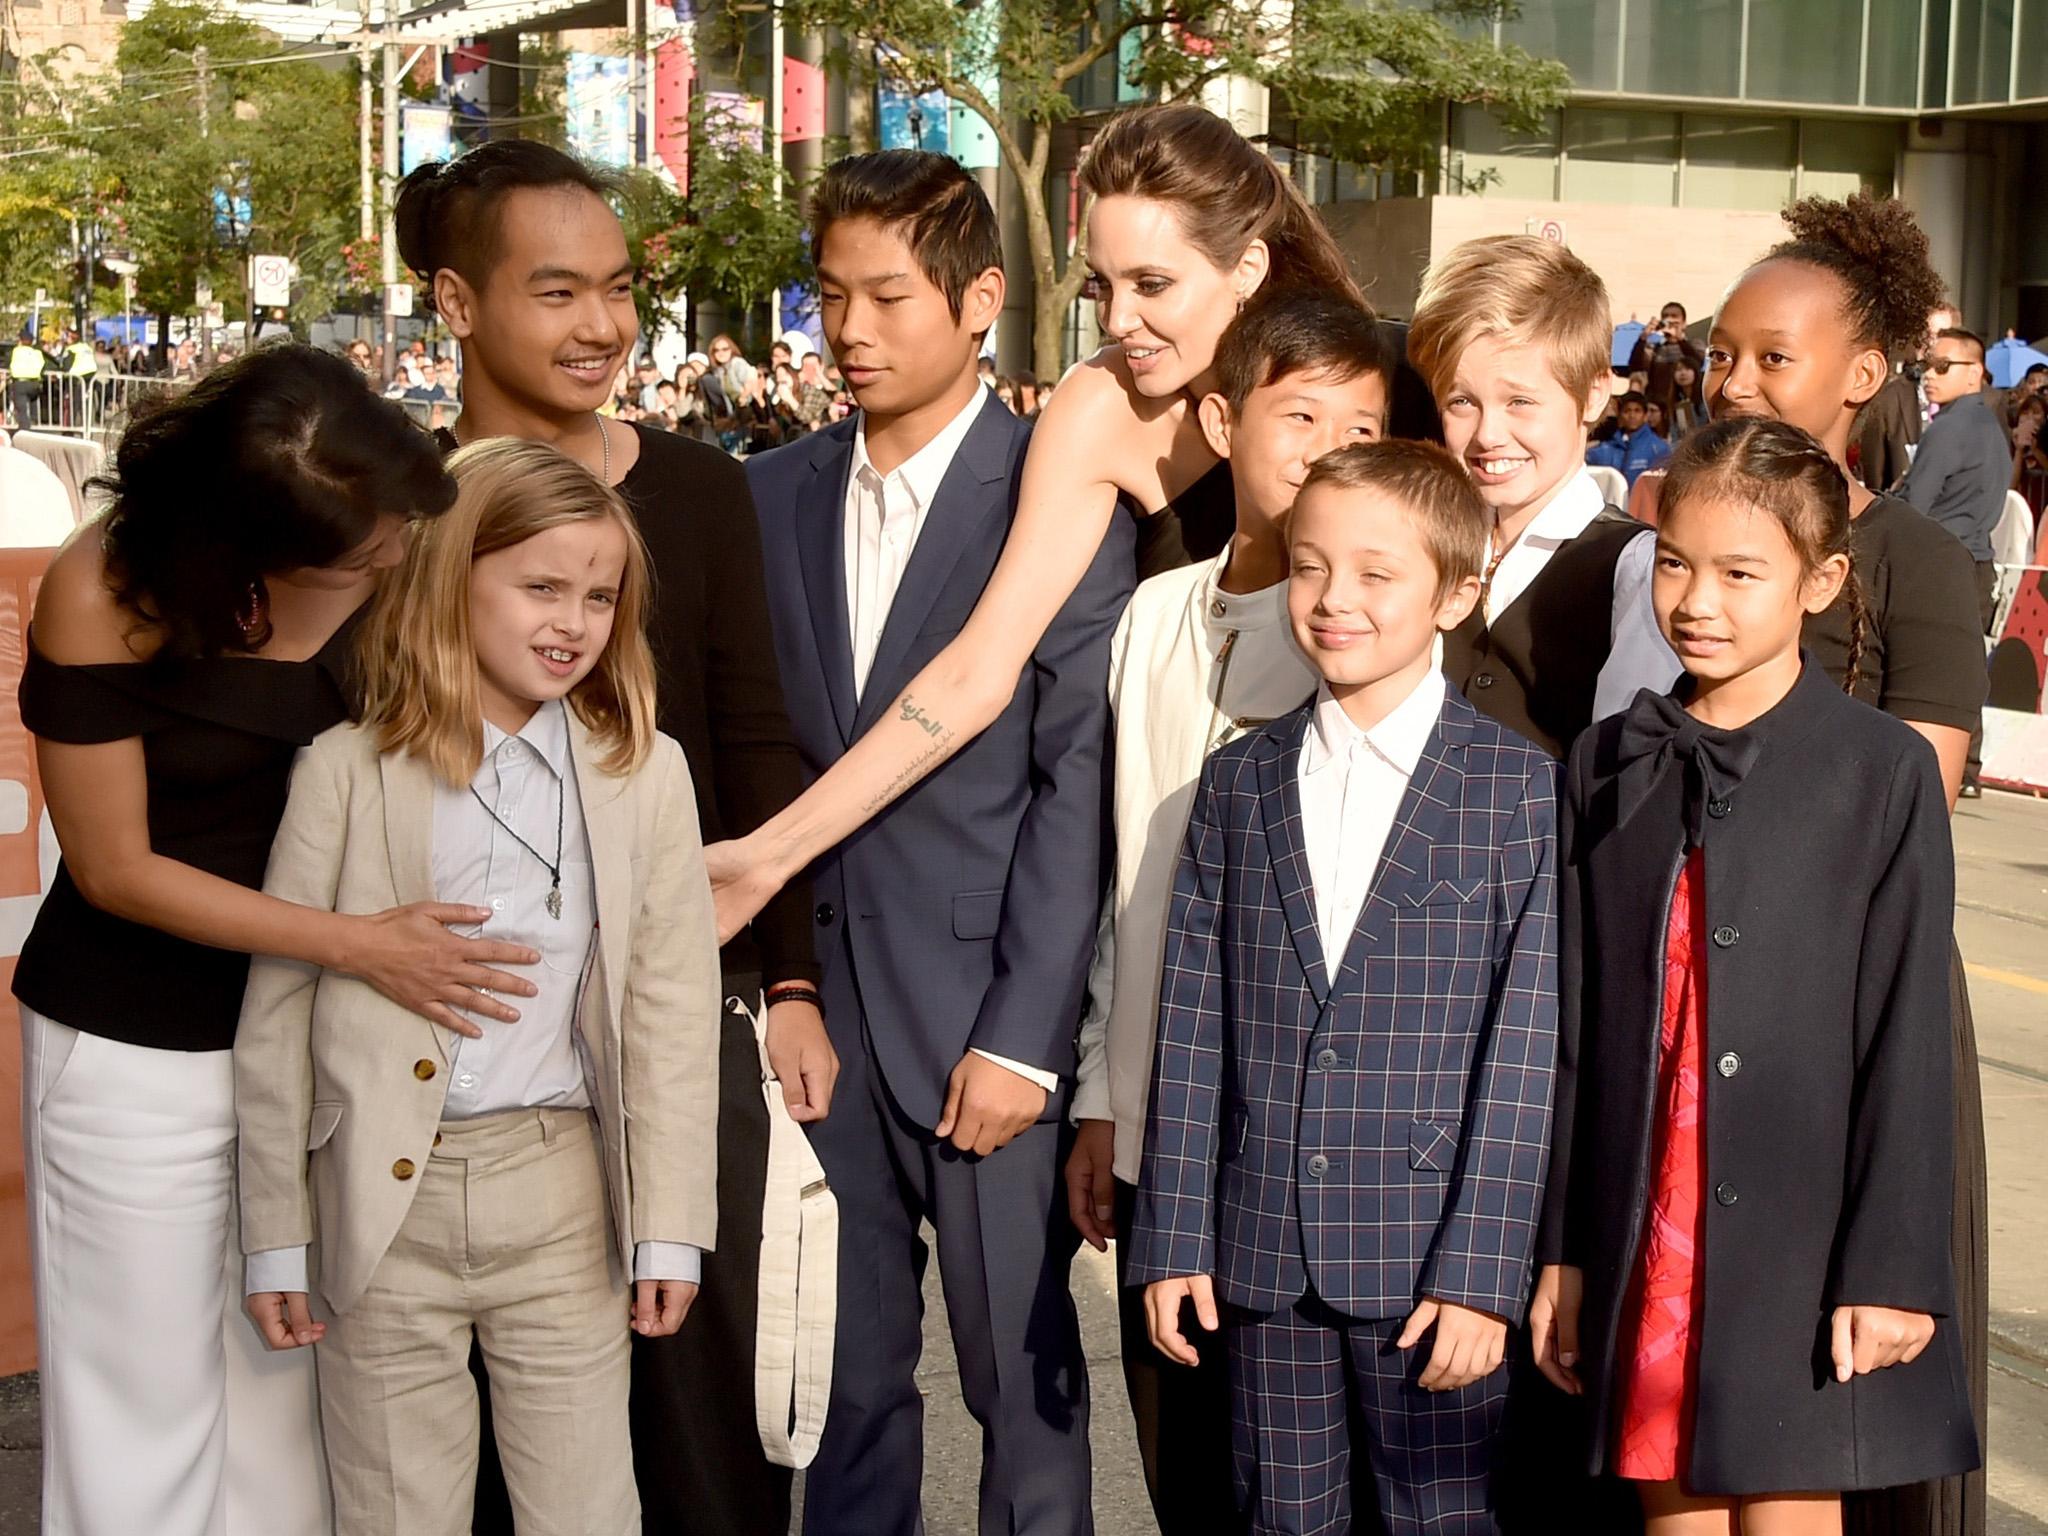 Friends and family attend the premiere of 'First They Killed My Father' at the Toronto film festival last week: (from left) Loung Ung, Vivienne, Maddox, Pax, Angelina, Kimhak Mun, Knox, Shiloh, Zahara and Sareum Srey Moch